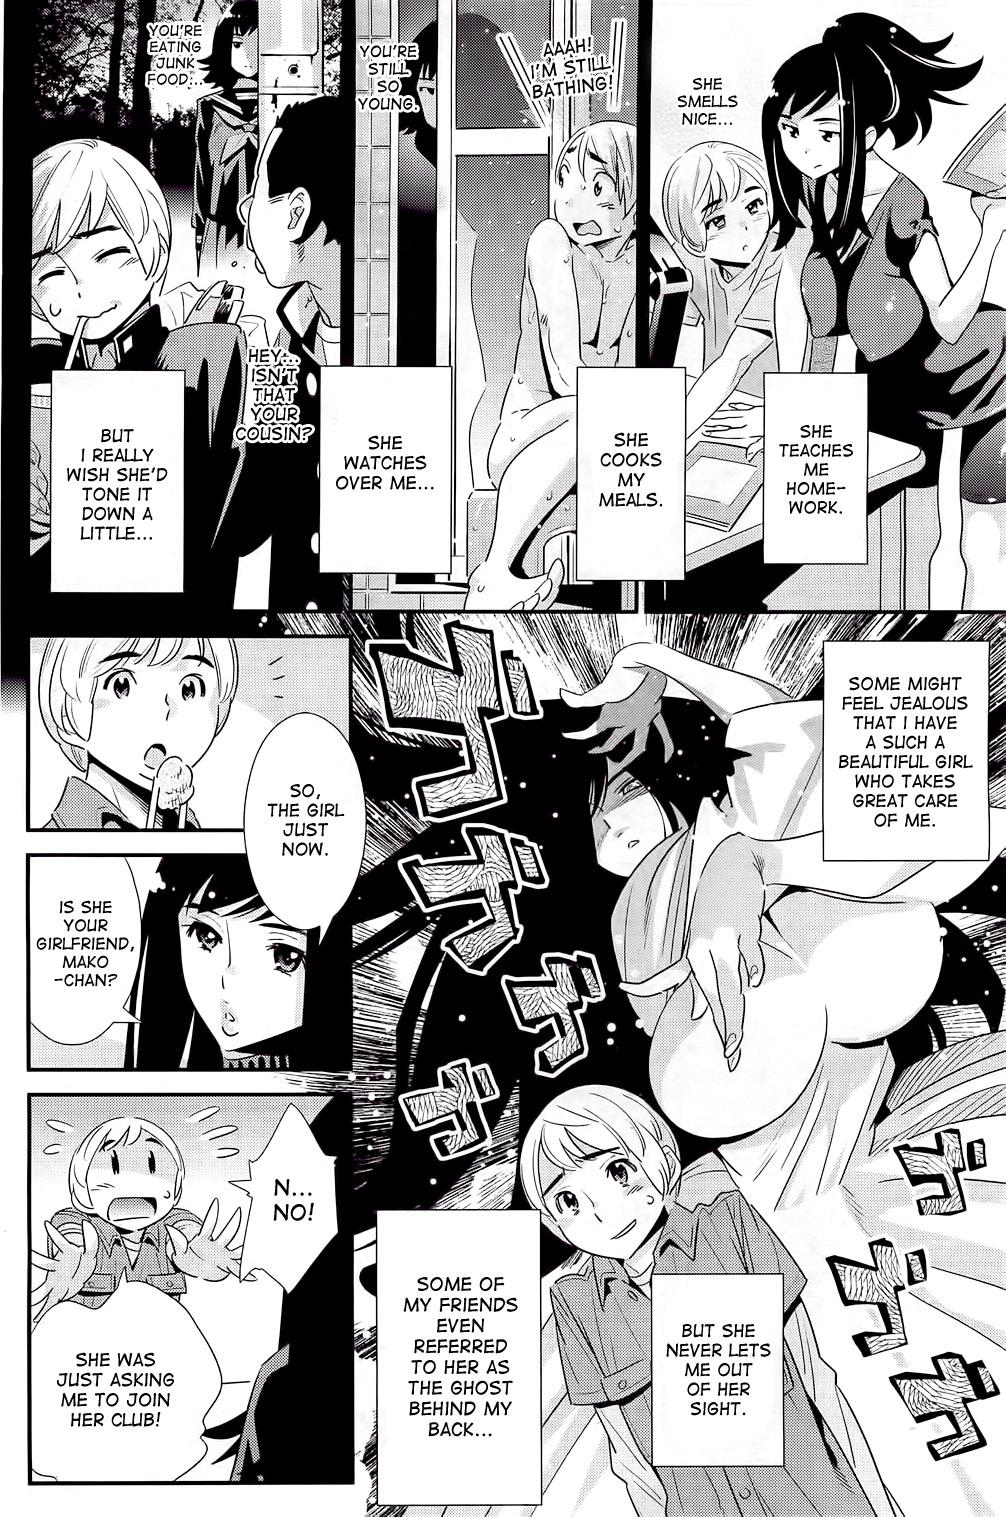 Hijab Boku no Haigorei? | The Ghost Behind My Back Game - Page 4